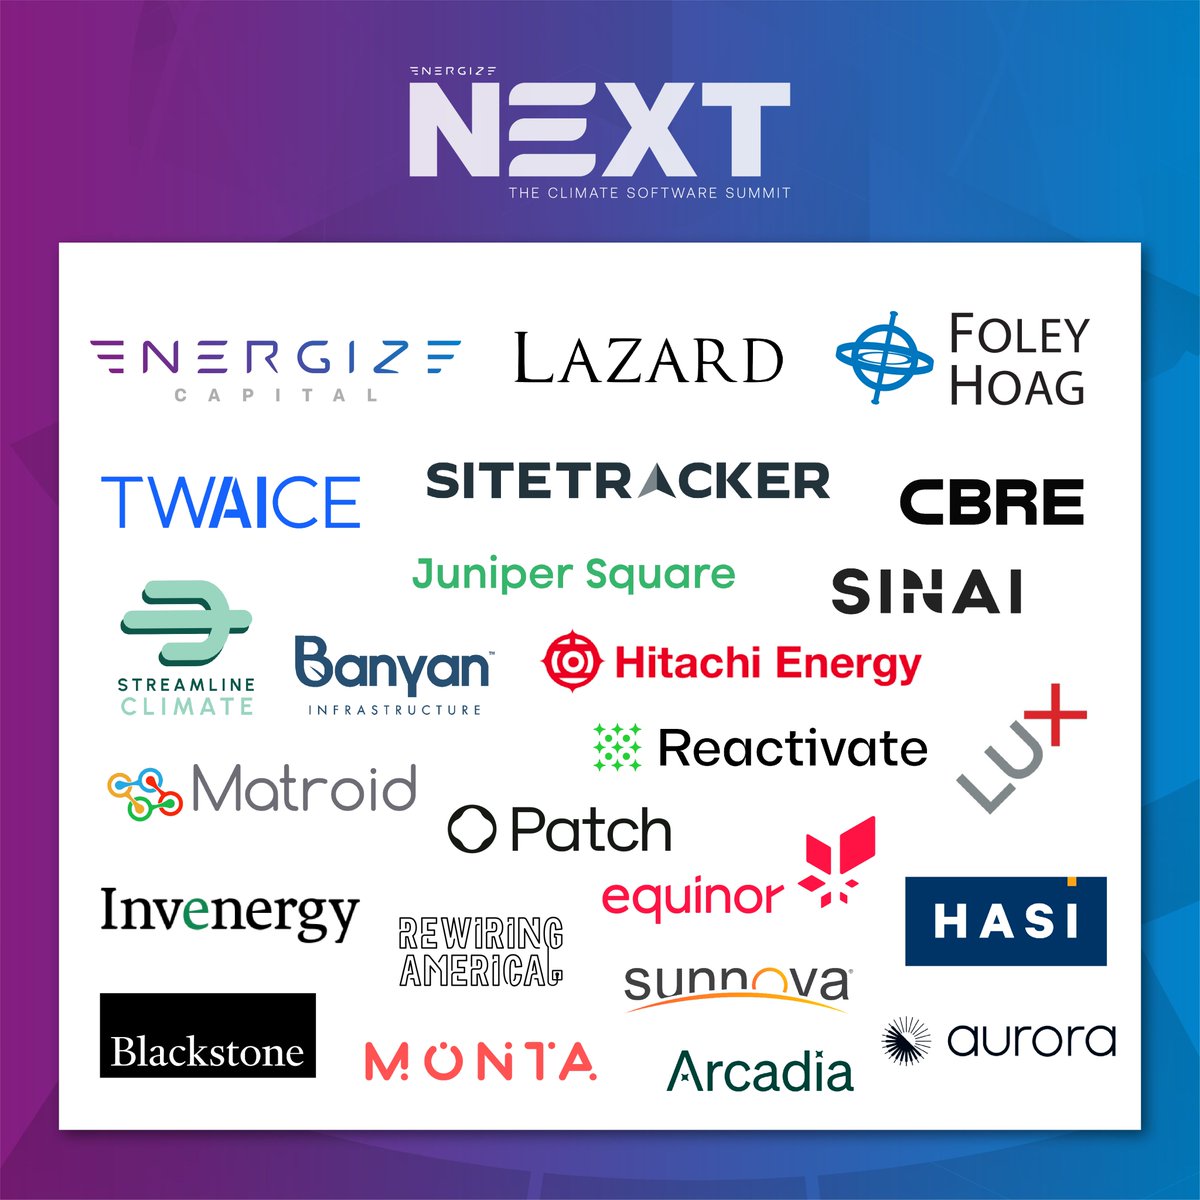 Our team is gearing up to host our flagship event, Energize NEXT: The Climate Software Summit, next week! We're excited to convene #climatetech innovators, operators and investors in our home city as part of #ChicagoClimateWeek🌎